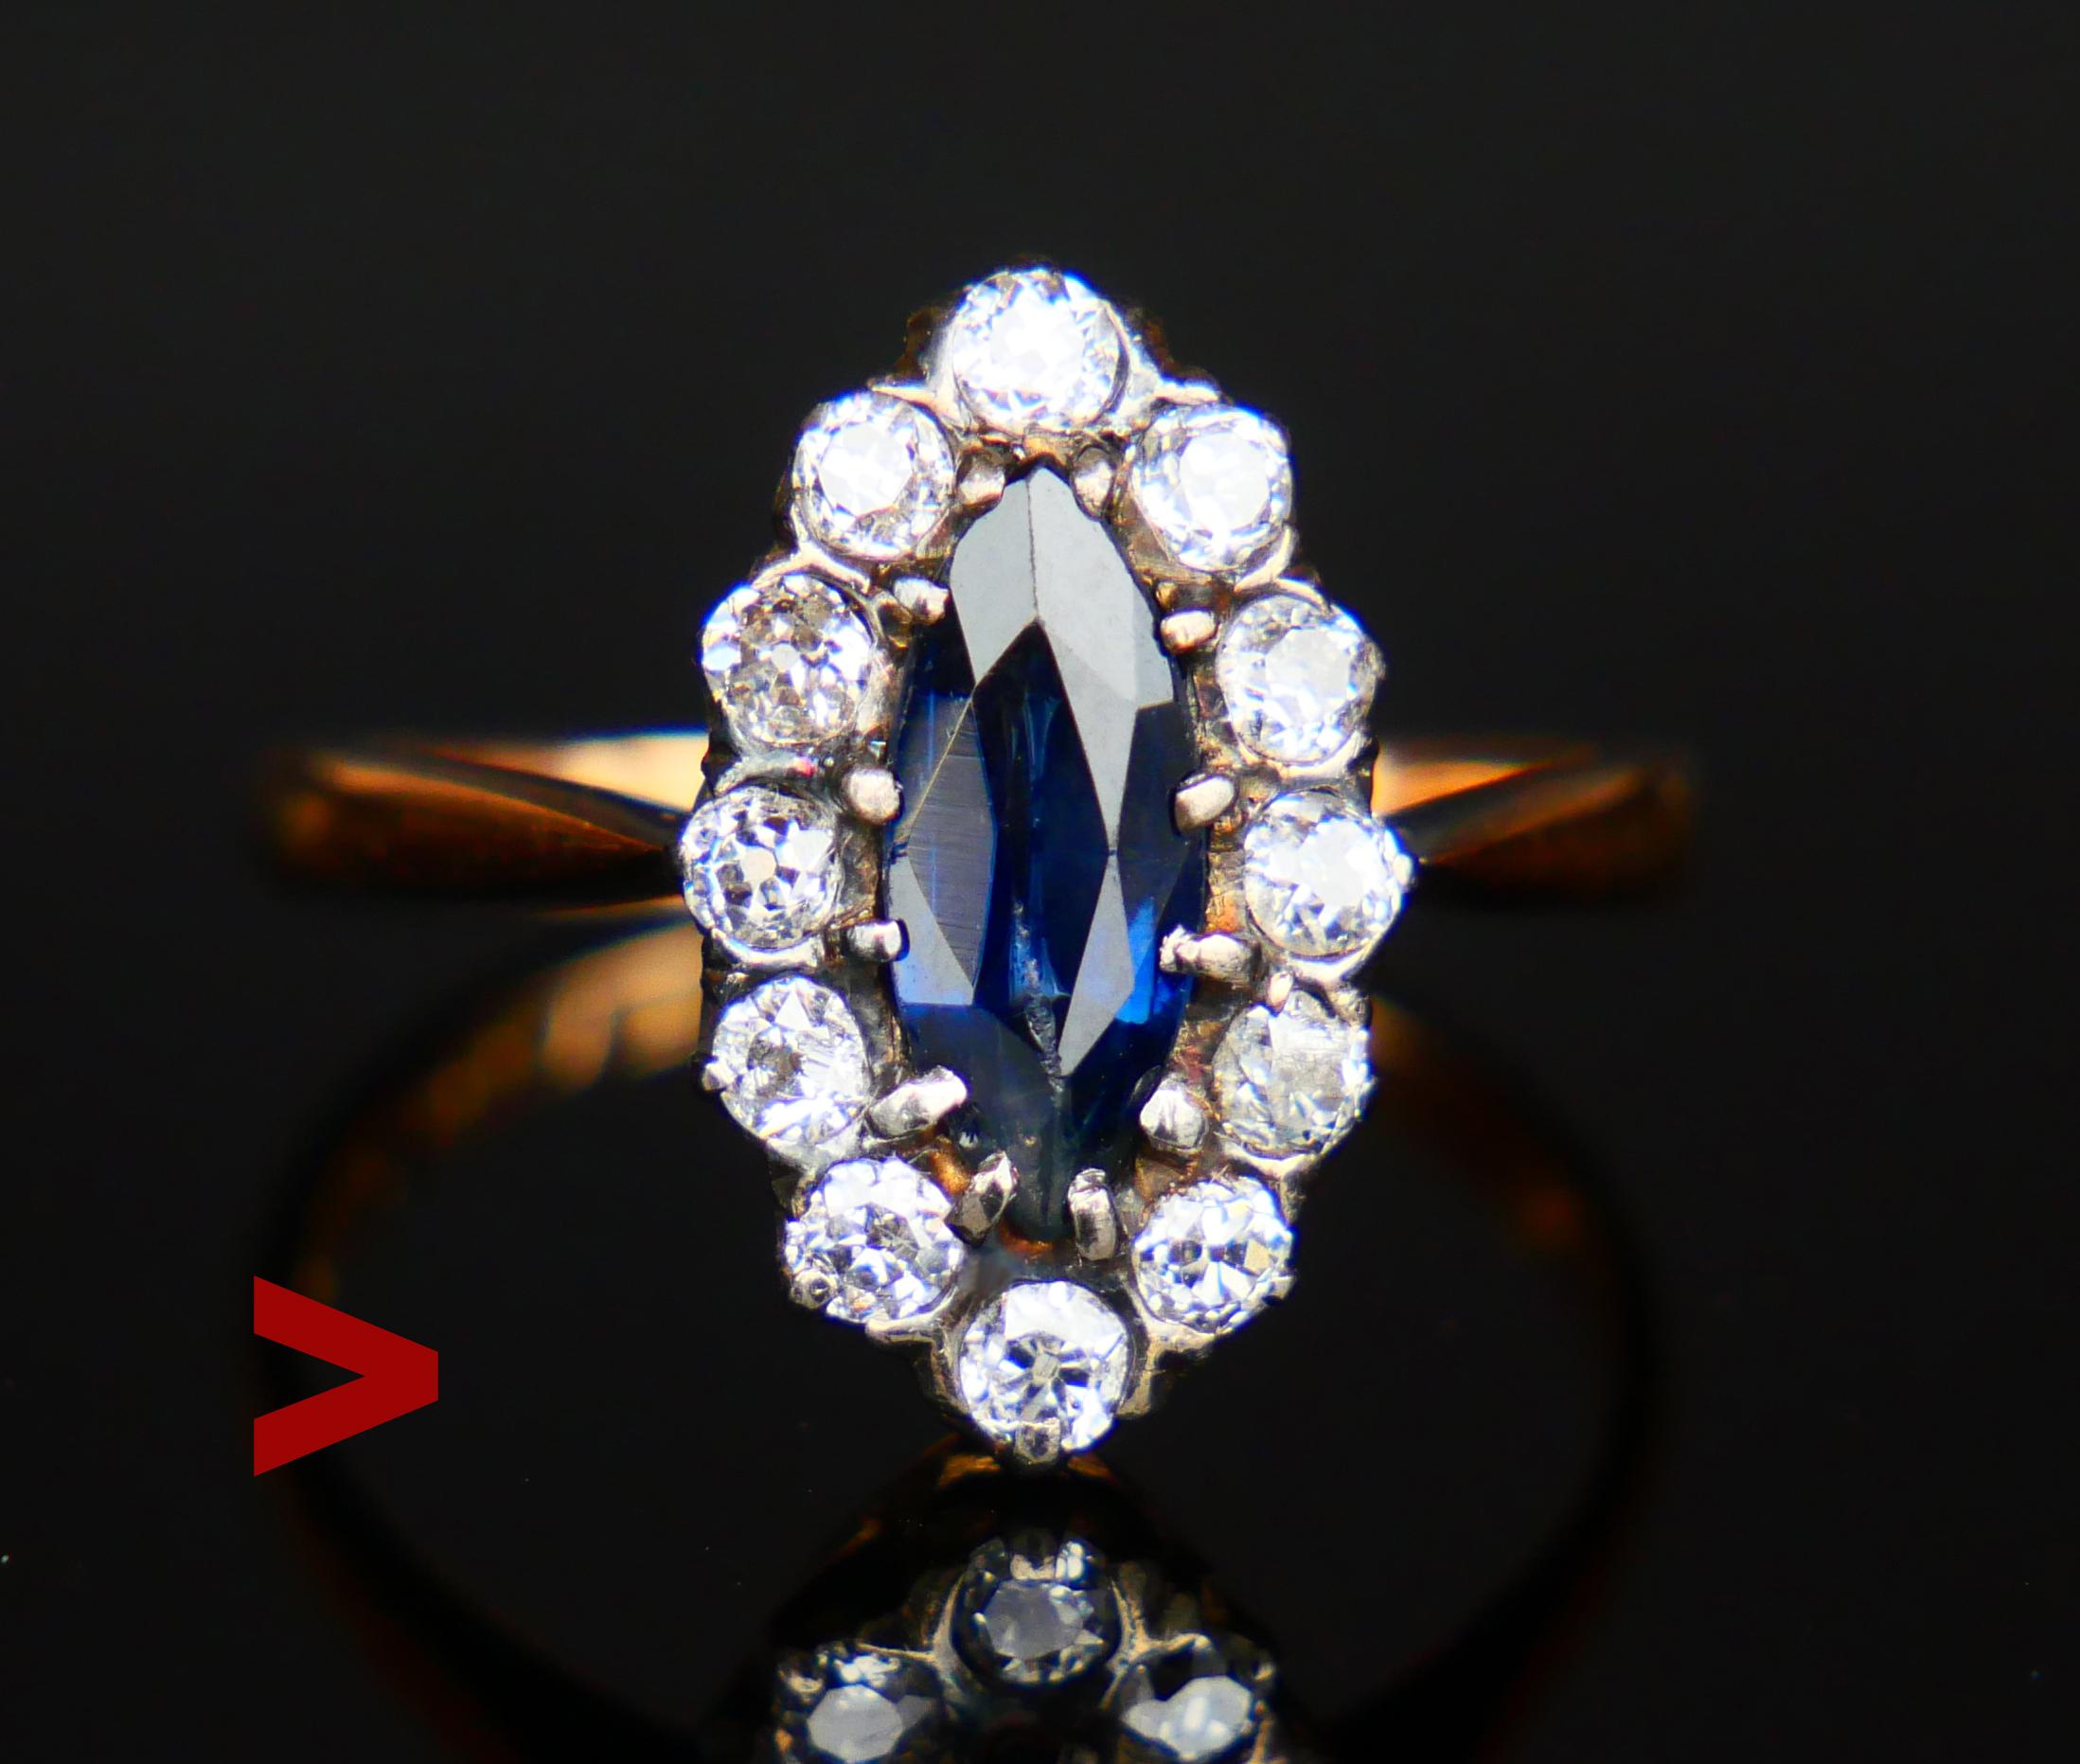 This ring has a navette or boat-shaped crown with Silver or White Gold clusters melted into a solid 18K Rose Gold base. The central stone is marquise cut natural Blue Sapphire surrounded with 12 old diamond cut Diamonds.

Swedish hallmarks,